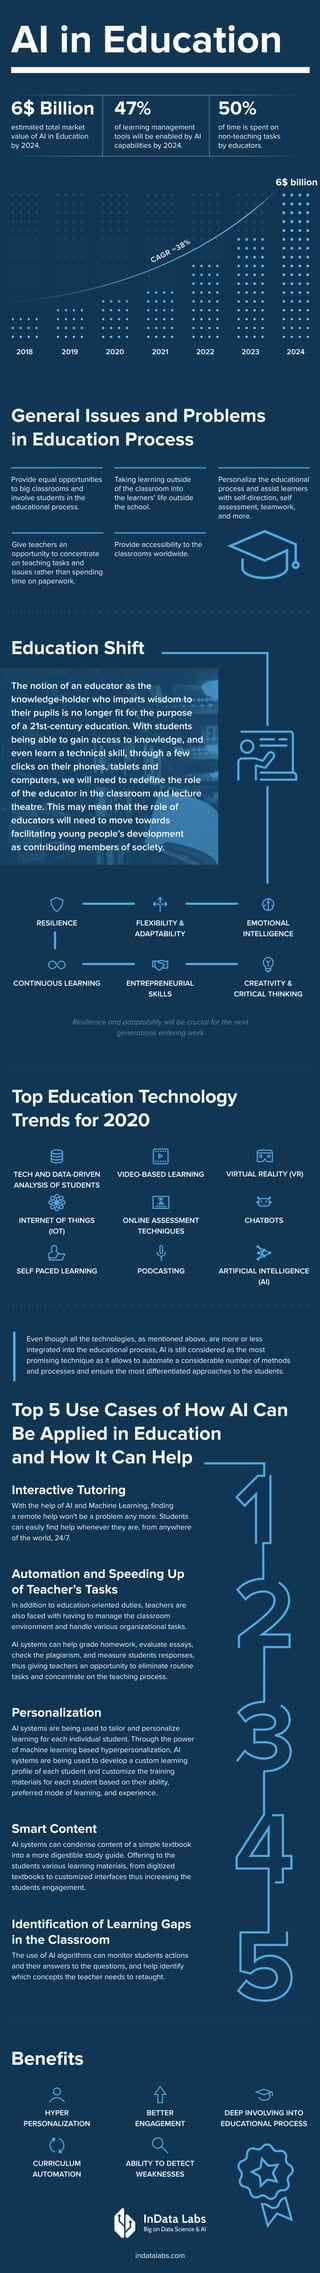 AI in Education
6$ Billion
6$ billion
General Issues and Problems
in Education Process
Education Shift
Top Education Technology 
Trends for 2020
Benefits
Top 5 Use Cases of How AI Can
Be Applied in Education

and How It Can Help
estimated total market
value of AI in Education 
by 2024.
The notion of an educator as the
knowledge-holder who imparts wisdom to
their pupils is no longer fit for the purpose 
of a 21st-century education. With students
being able to gain access to knowledge, and
even learn a technical skill, through a few
clicks on their phones, tablets and
computers, we will need to redefine the role
of the educator in the classroom and lecture
theatre. This may mean that the role of
educators will need to move towards
facilitating young people’s development 
as contributing members of society.
Interactive Tutoring
With the help of AI and Machine Learning, finding 
a remote help won't be a problem any more. Students
can easily find help whenever they are, from anywhere
of the world, 24/7.
Automation and Speeding Up 
of Teacher’s Tasks
In addition to education-oriented duties, teachers are
also faced with having to manage the classroom
environment and handle various organizational tasks.
Personalization
AI systems are being used to tailor and personalize
learning for each individual student. Through the power
of machine learning based hyperpersonalization, AI
systems are being used to develop a custom learning
profile of each student and customize the training
materials for each student based on their ability,
preferred mode of learning, and experience.
Smart Content
AI systems can condense content of a simple textbook
into a more digestible study guide. Offering to the
students various learning materials, from digitized
textbooks to customized interfaces thus increasing the
students engagement.
Identification of Learning Gaps 
in the Classroom

The use of AI algorithms can monitor students actions
and their answers to the questions, and help identify
which concepts the teacher needs to retaught.

Resilience and adaptability will be crucial for the next
generations entering work
of learning management
tools will be enabled by AI
capabilities by 2024.
of time is spent on
non-teaching tasks 
by educators.
47% 50%
Resilience
Tech and Data-Driven
Analysis of Students
Hyper
personalization
Curriculum
automation
Chatbots
Self Paced Learning Podcasting Artificial Intelligence
(AI)
Video-based learning
Better 
engagement
Internet of Things
(IoT)
Ability to detect
weaknesses
Virtual Reality (VR)
Deep involving into
educational process
Online Assessment
Techniques
Flexibility &

adaptability
Emotional
intelligence
continuous learning entrepreneurial
skills
creativity &

Critical thinking
2018 2019 2020 2021 2022 2023 2024
Provide equal opportunities
to big classrooms and
involve students in the
educational process.
Taking learning outside 
of the classroom into 
the learners’ life outside 
the school.
Personalize the educational
process and assist learners
with self-direction, self
assessment, teamwork, 
and more.
Give teachers an
opportunity to concentrate
on teaching tasks and
issues rather than spending
time on paperwork.
Provide accessibility to the
classrooms worldwide.
AI systems can help grade homework, evaluate essays,
check the plagiarism, and measure students responses,
thus giving teachers an opportunity to eliminate routine
tasks and concentrate on the teaching process.

Even though all the technologies, as mentioned above, are more or less
integrated into the educational process, AI is still considered as the most
promising technique as it allows to automate a considerable number of methods
and processes and ensure the most differentiated approaches to the students.
indatalabs.com
Big on Data Science & AI
 